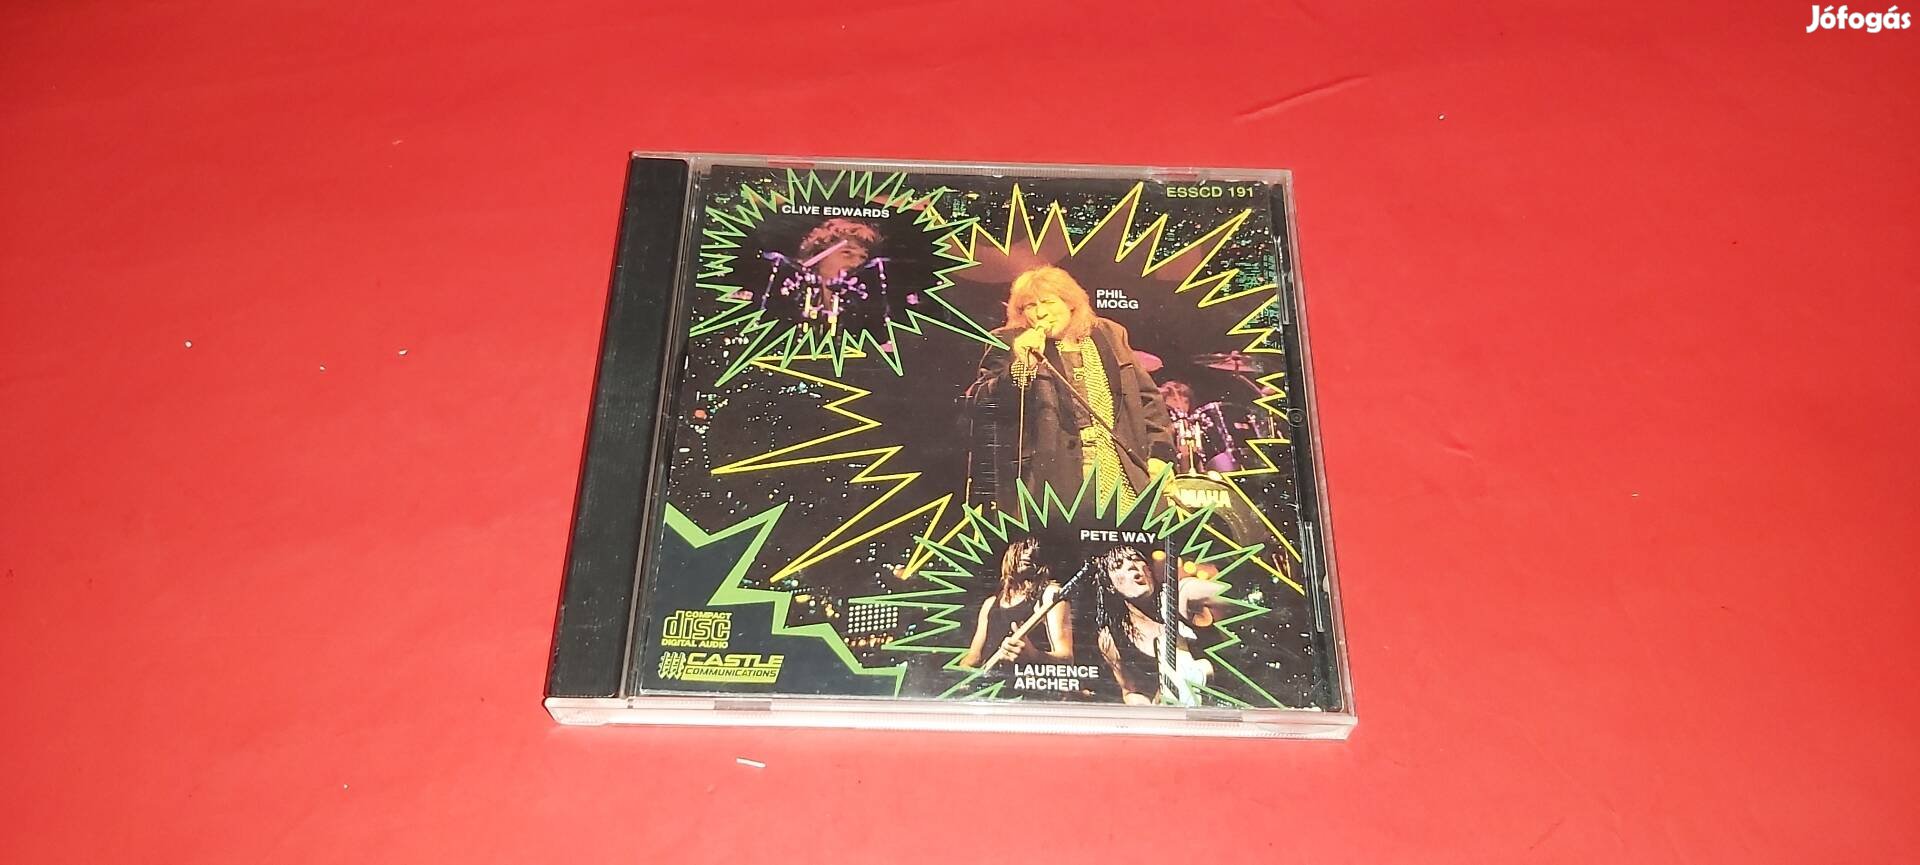 UFO Lights out in Tokyo -Live Cd 1993